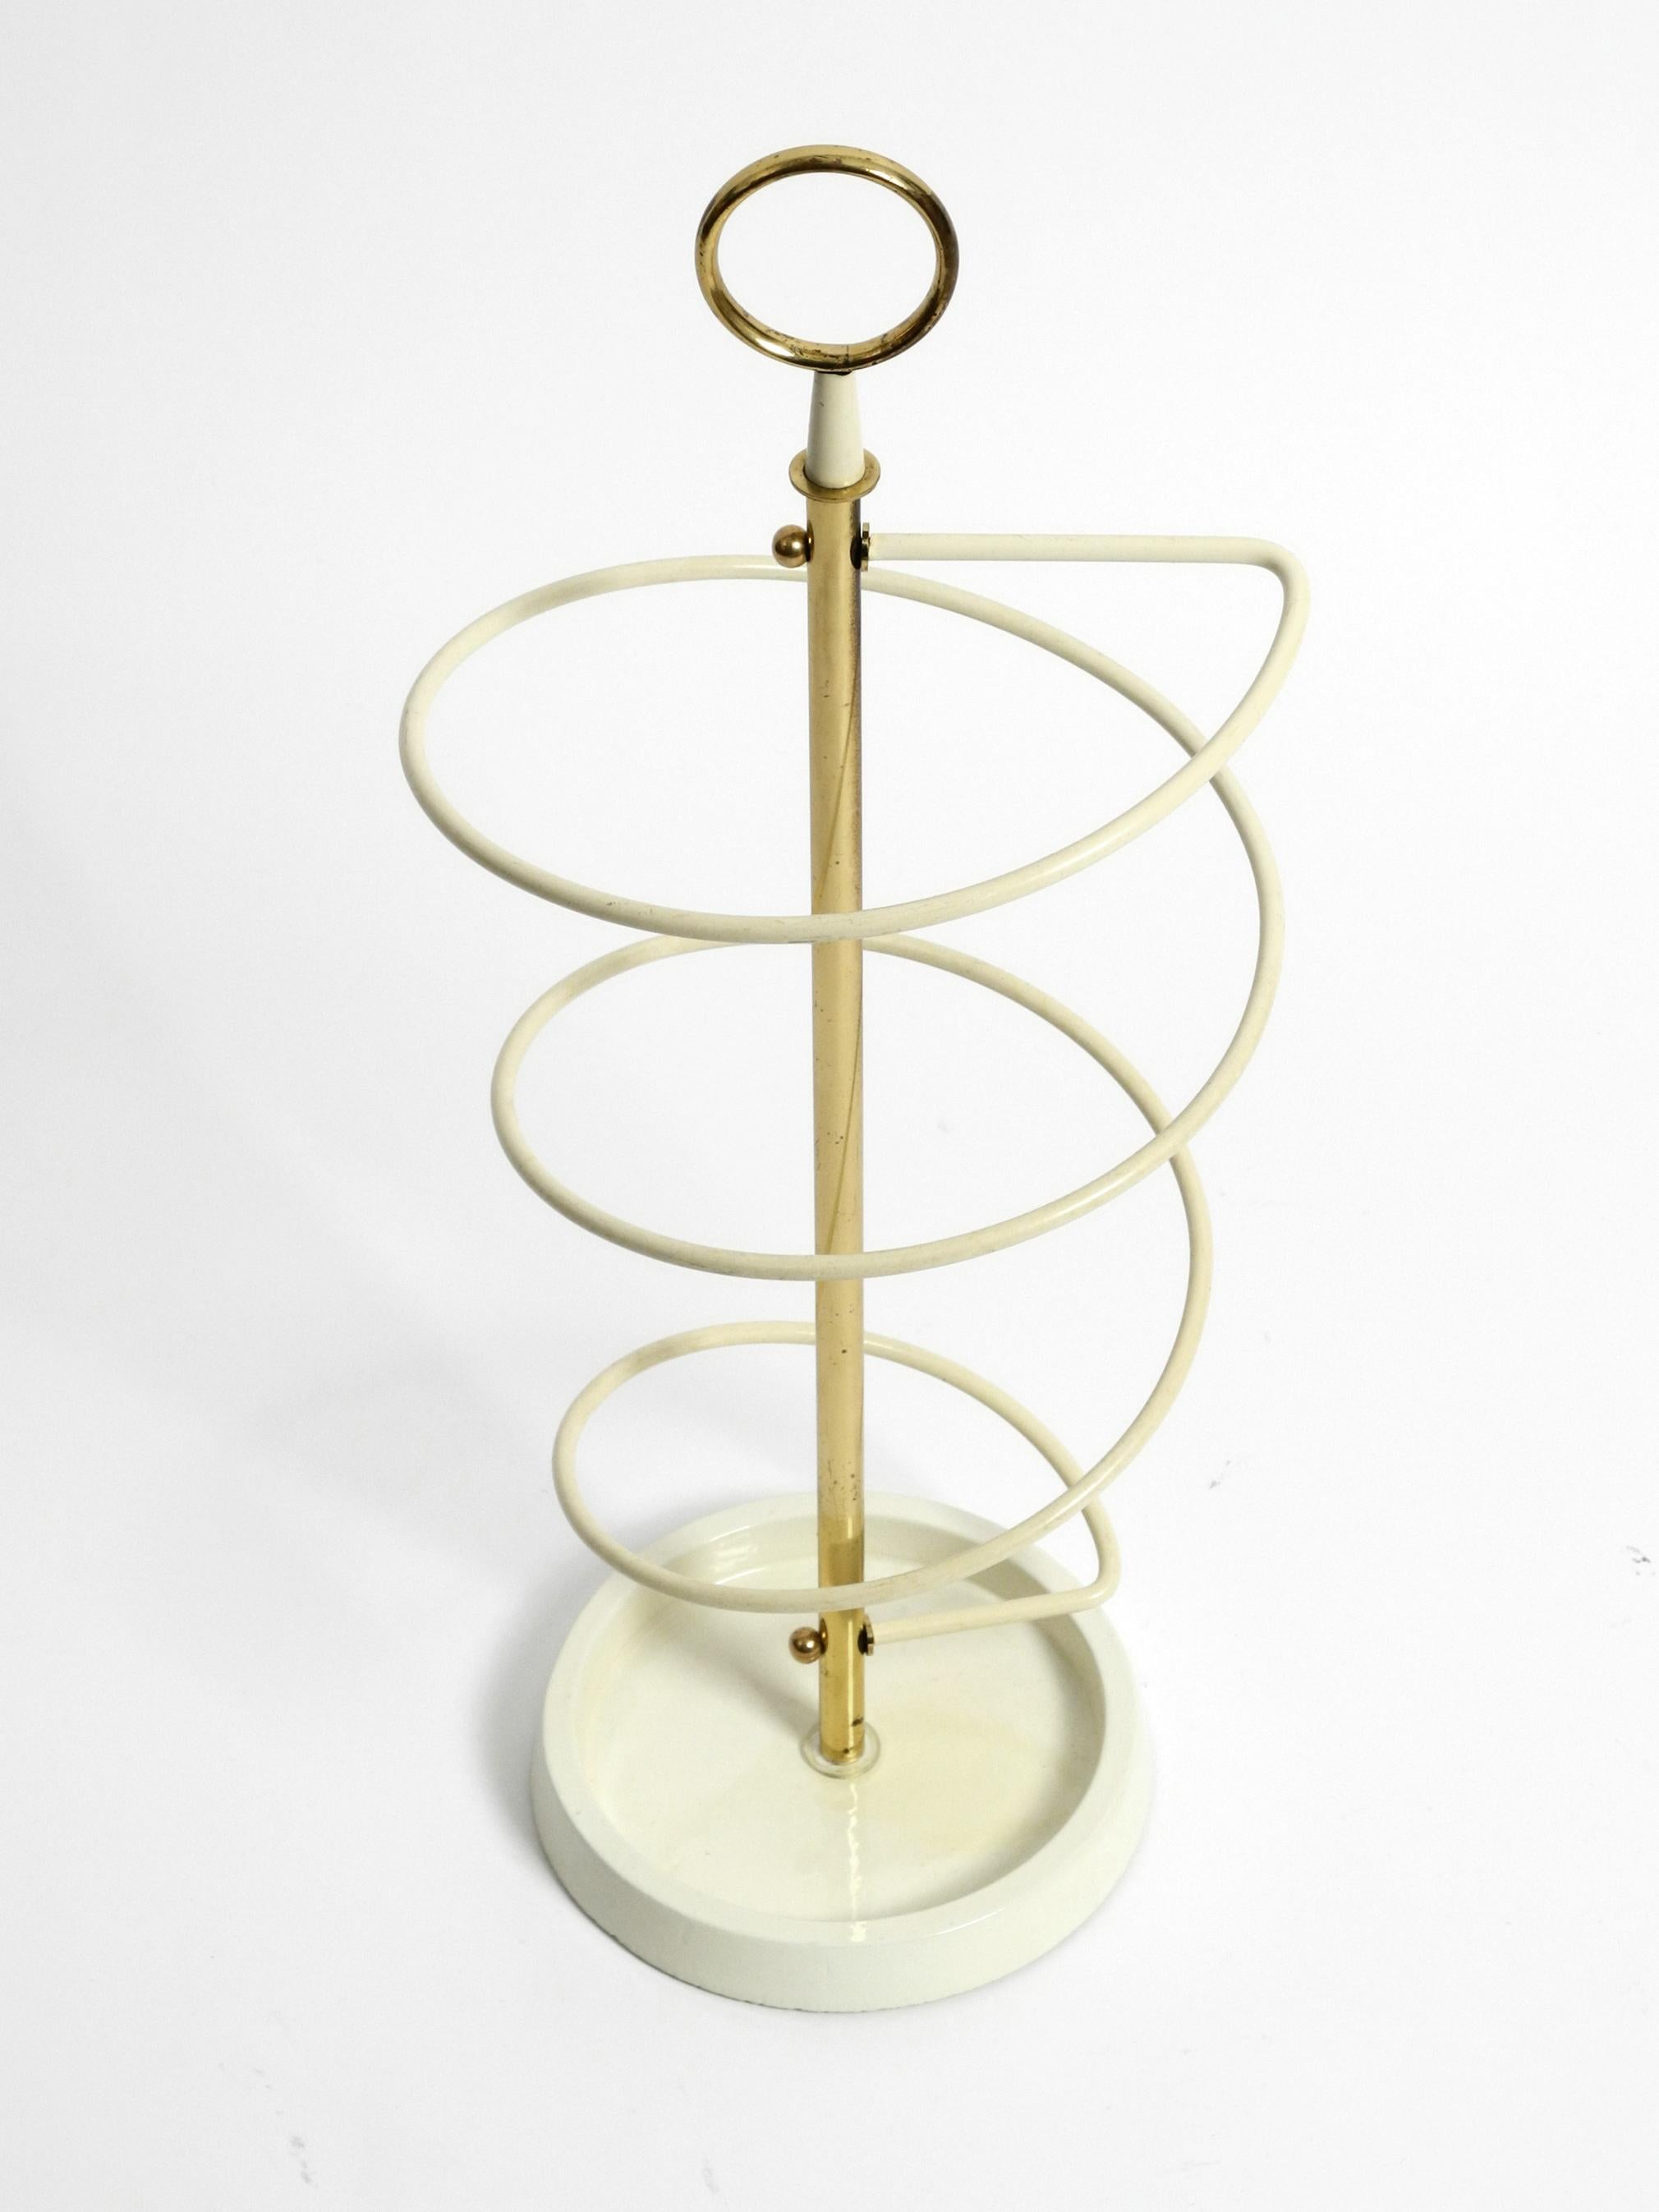 Extraordinary Rare Mid-Century Modern Umbrella Stand in String Helix Design For Sale 7